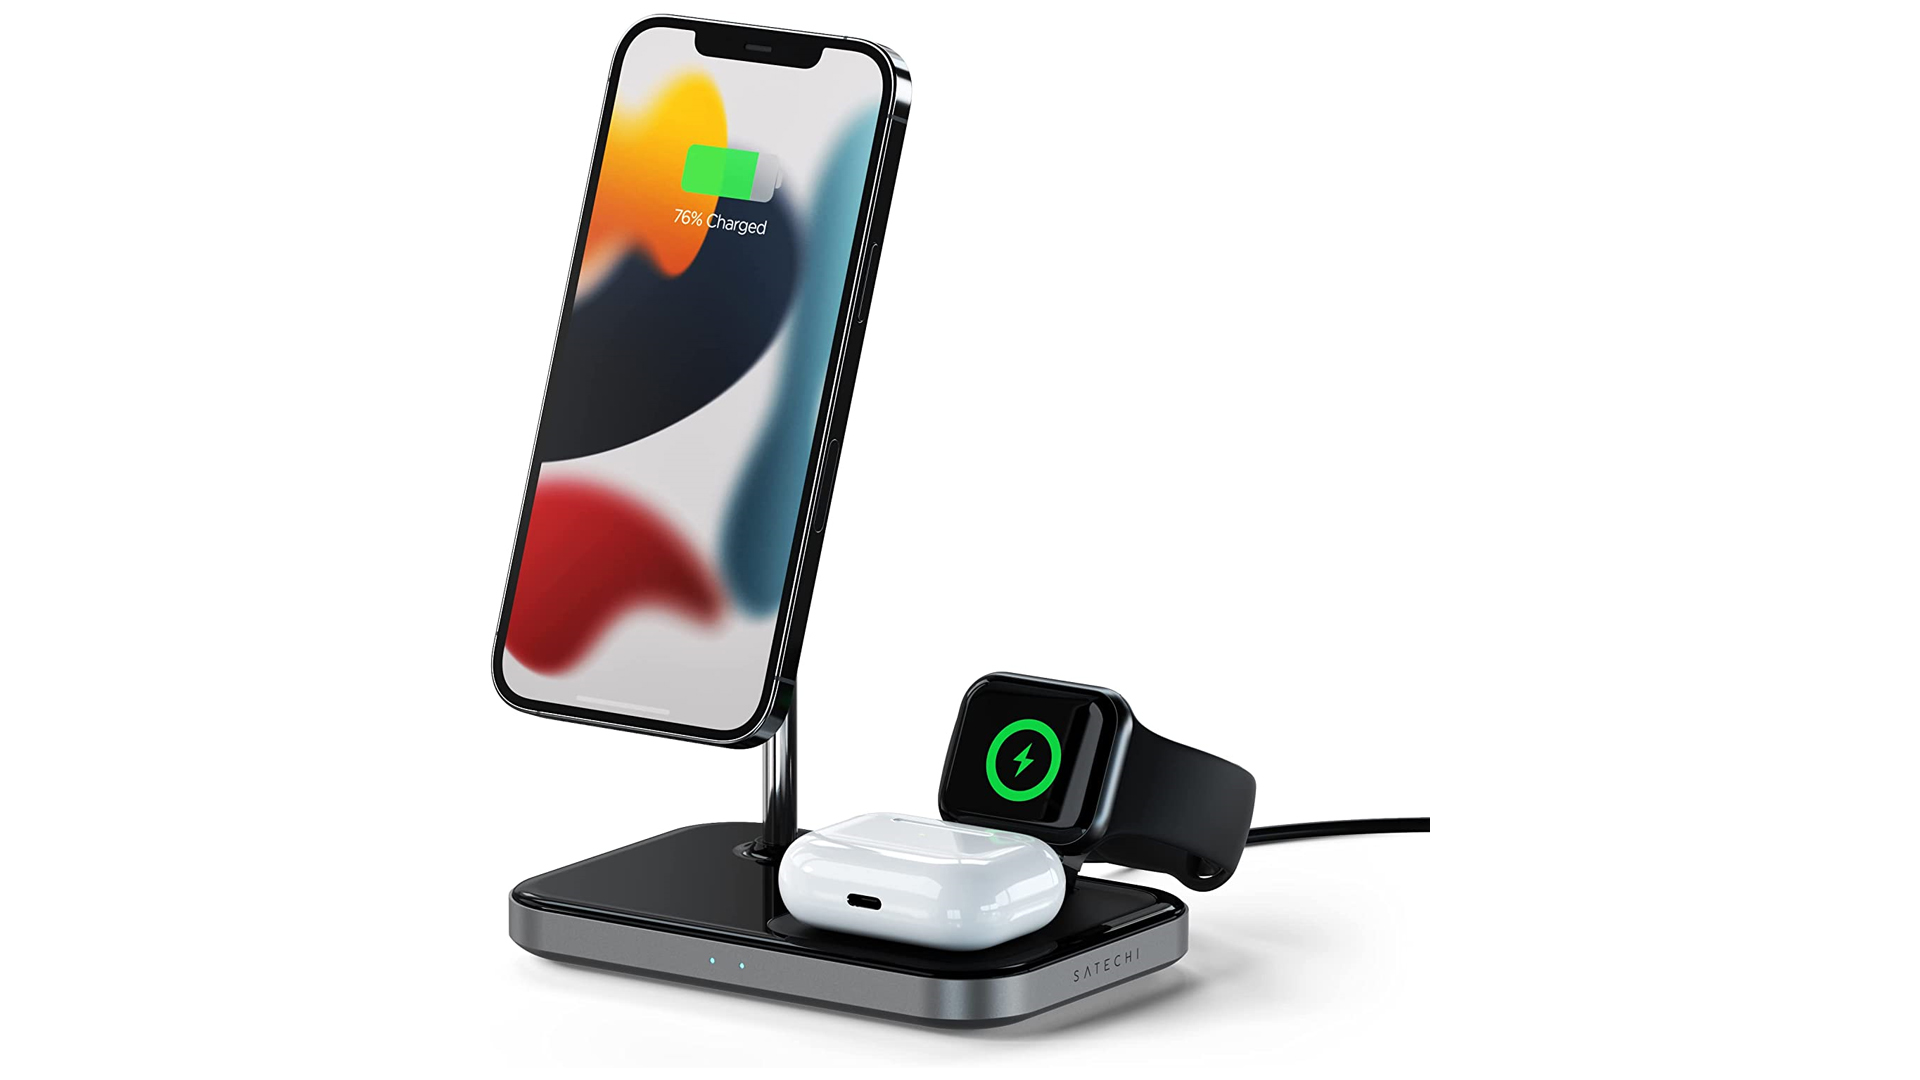 The Satechi 3 in 1 Magnetic Wireless Charging Stand